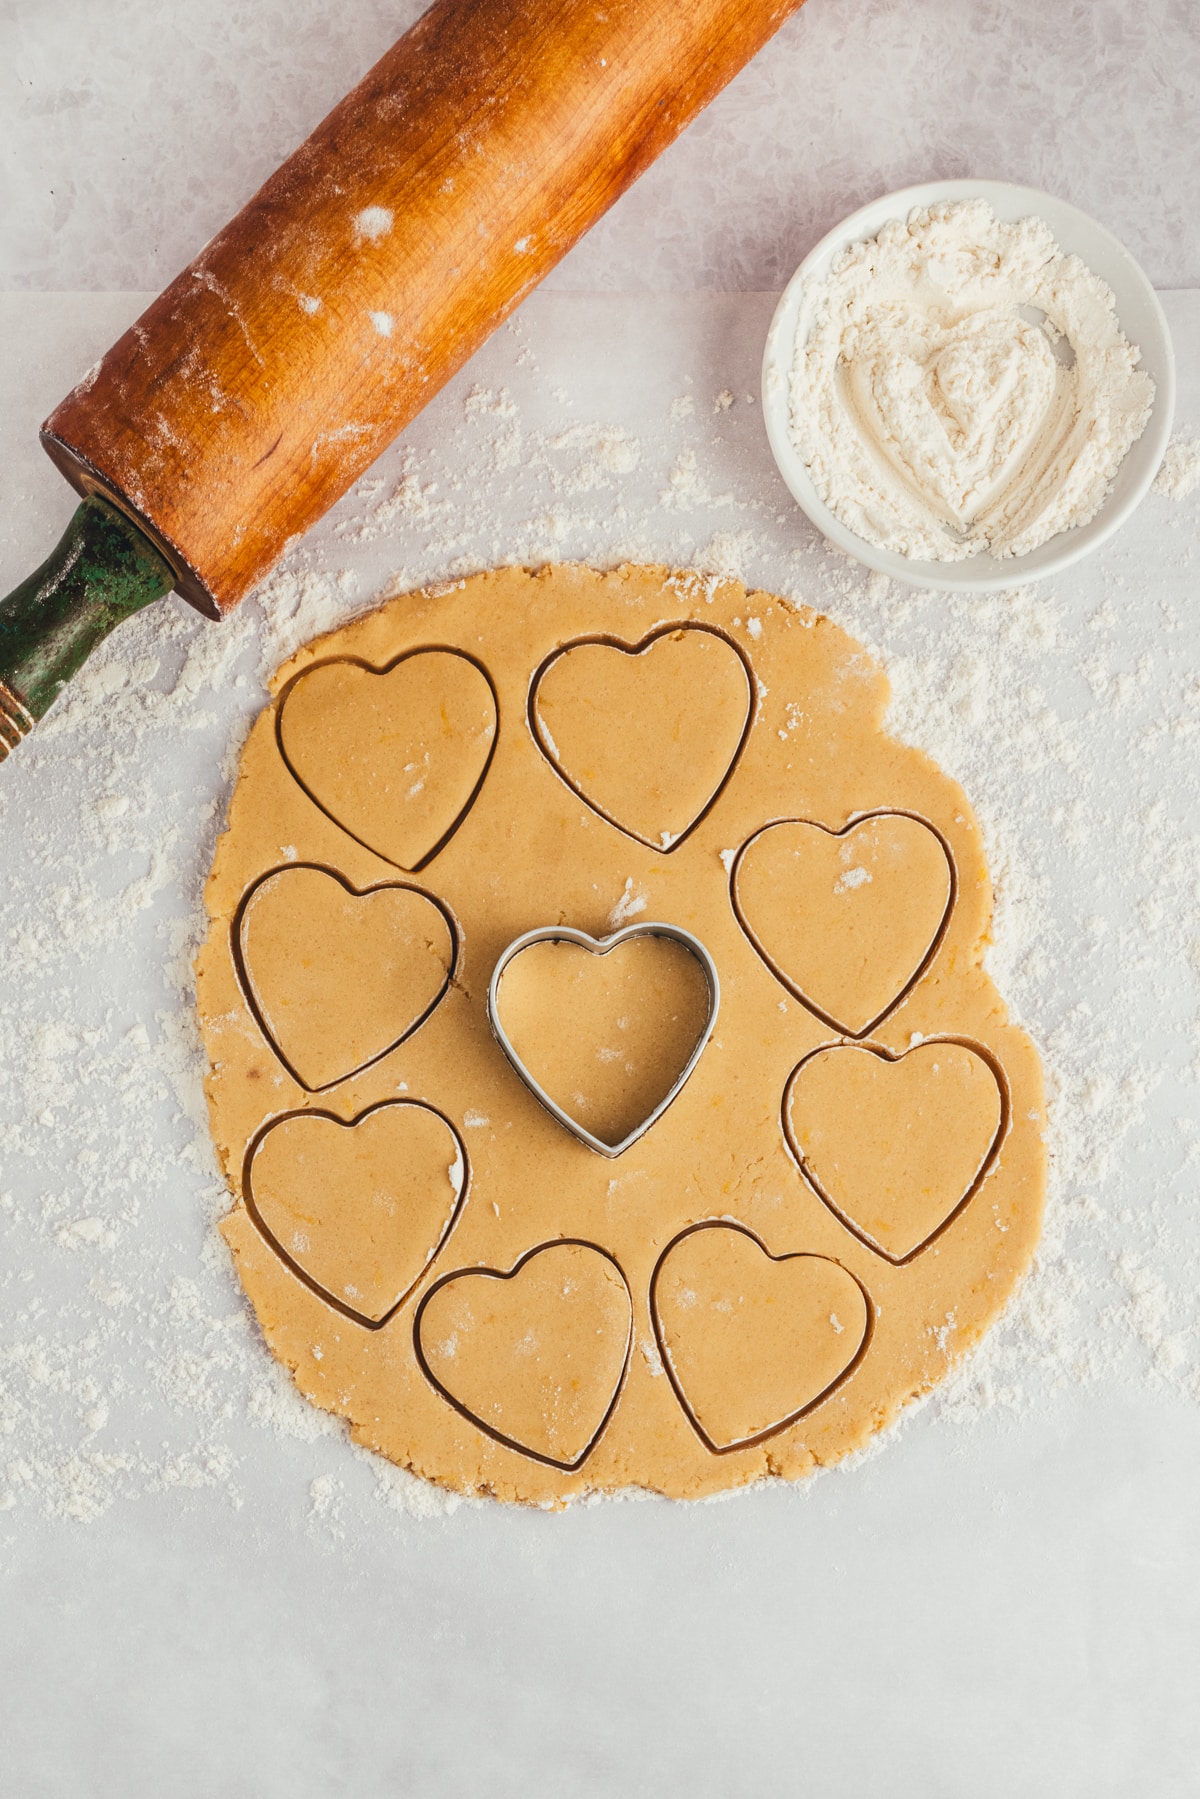 Using a heart shaped cutter to cut out cookies. 